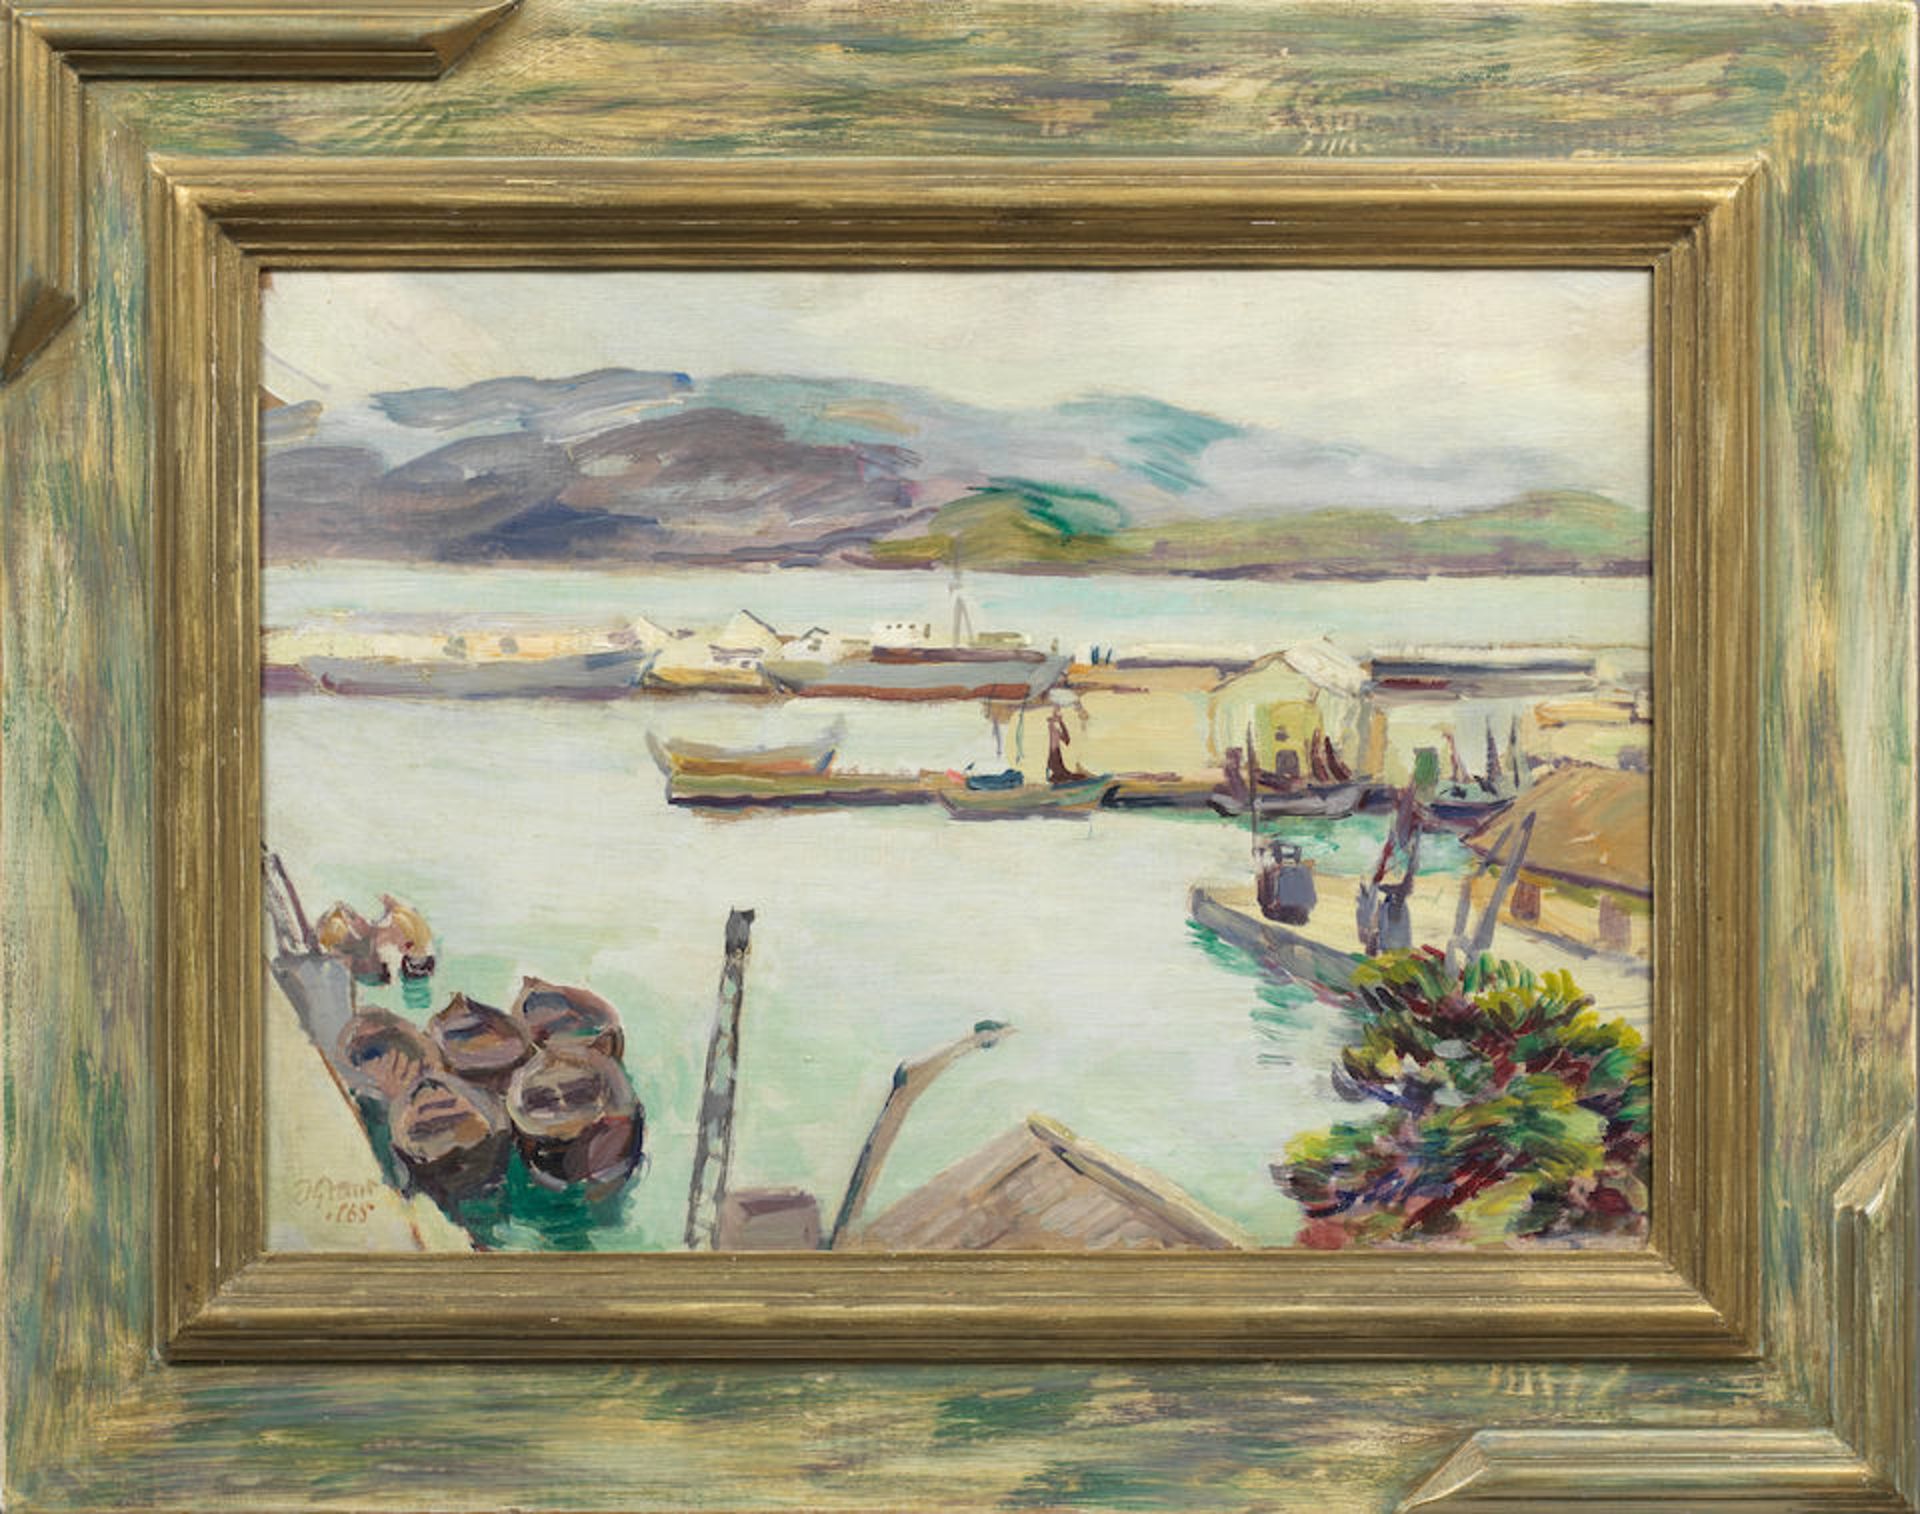 Duncan Grant (British, 1885-1978) The Harbour, Tangiers, Morocco 40.6 x 55.9 cm. (16 x 22 in.) - Image 2 of 3